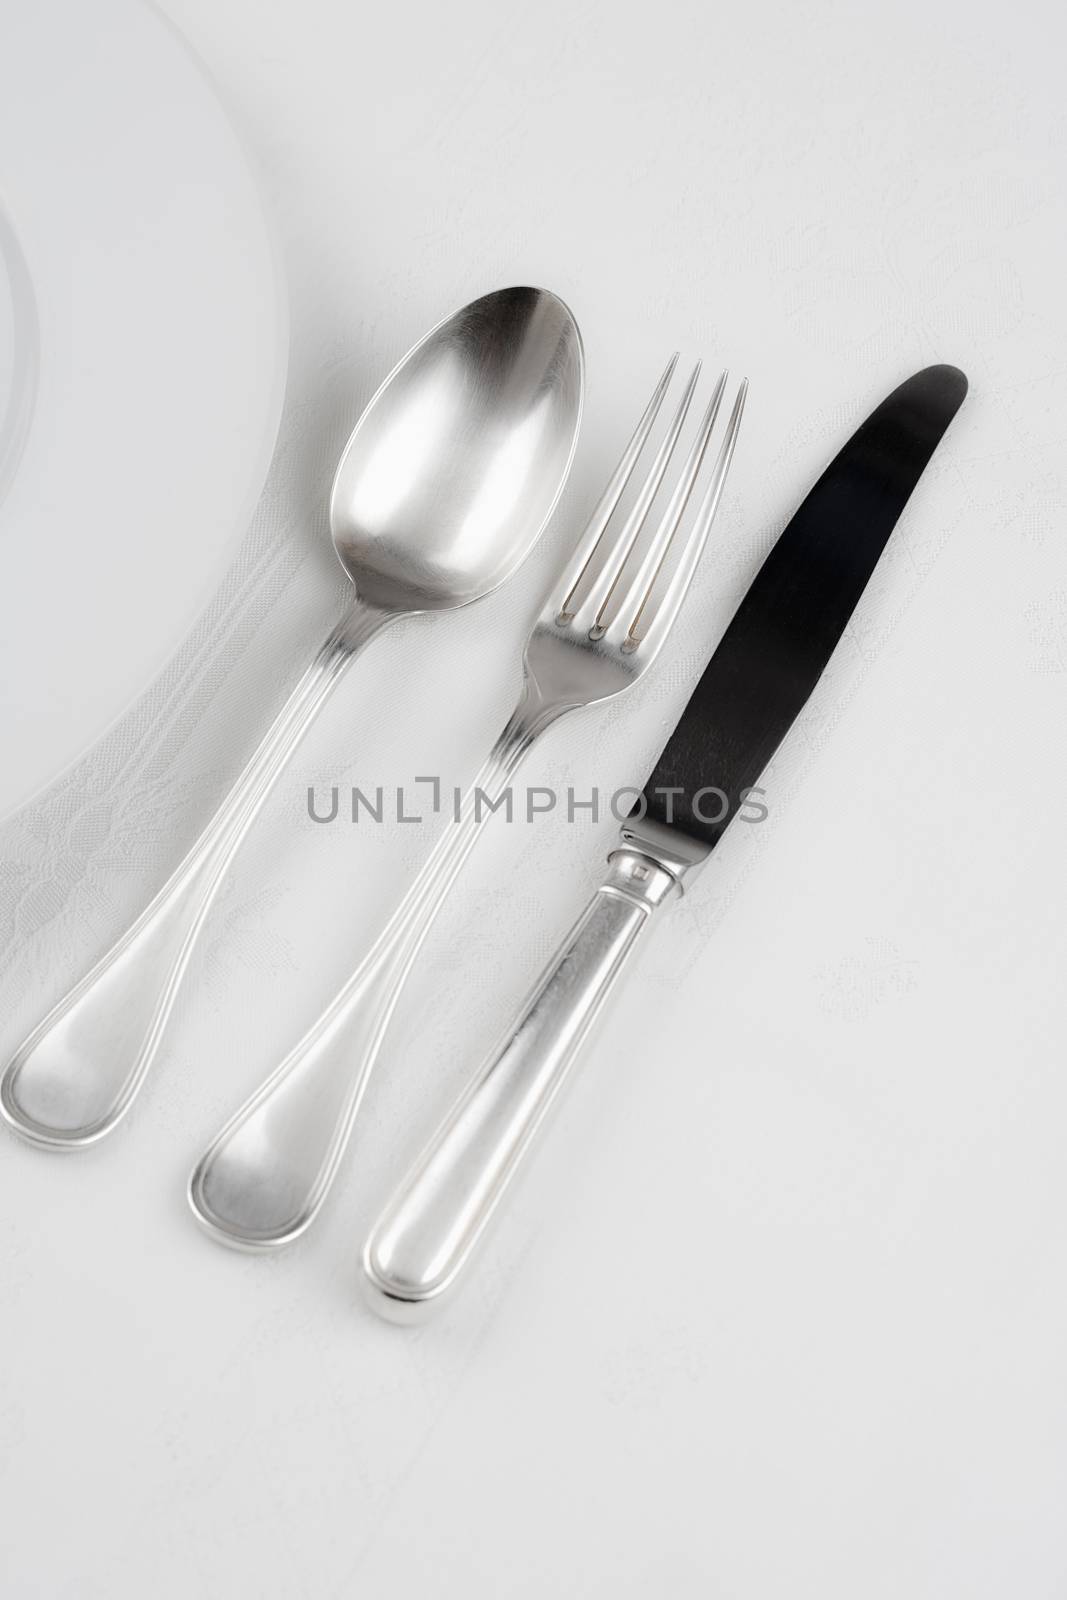 silverware - knife, fork and spoon next to a plate on white cloth